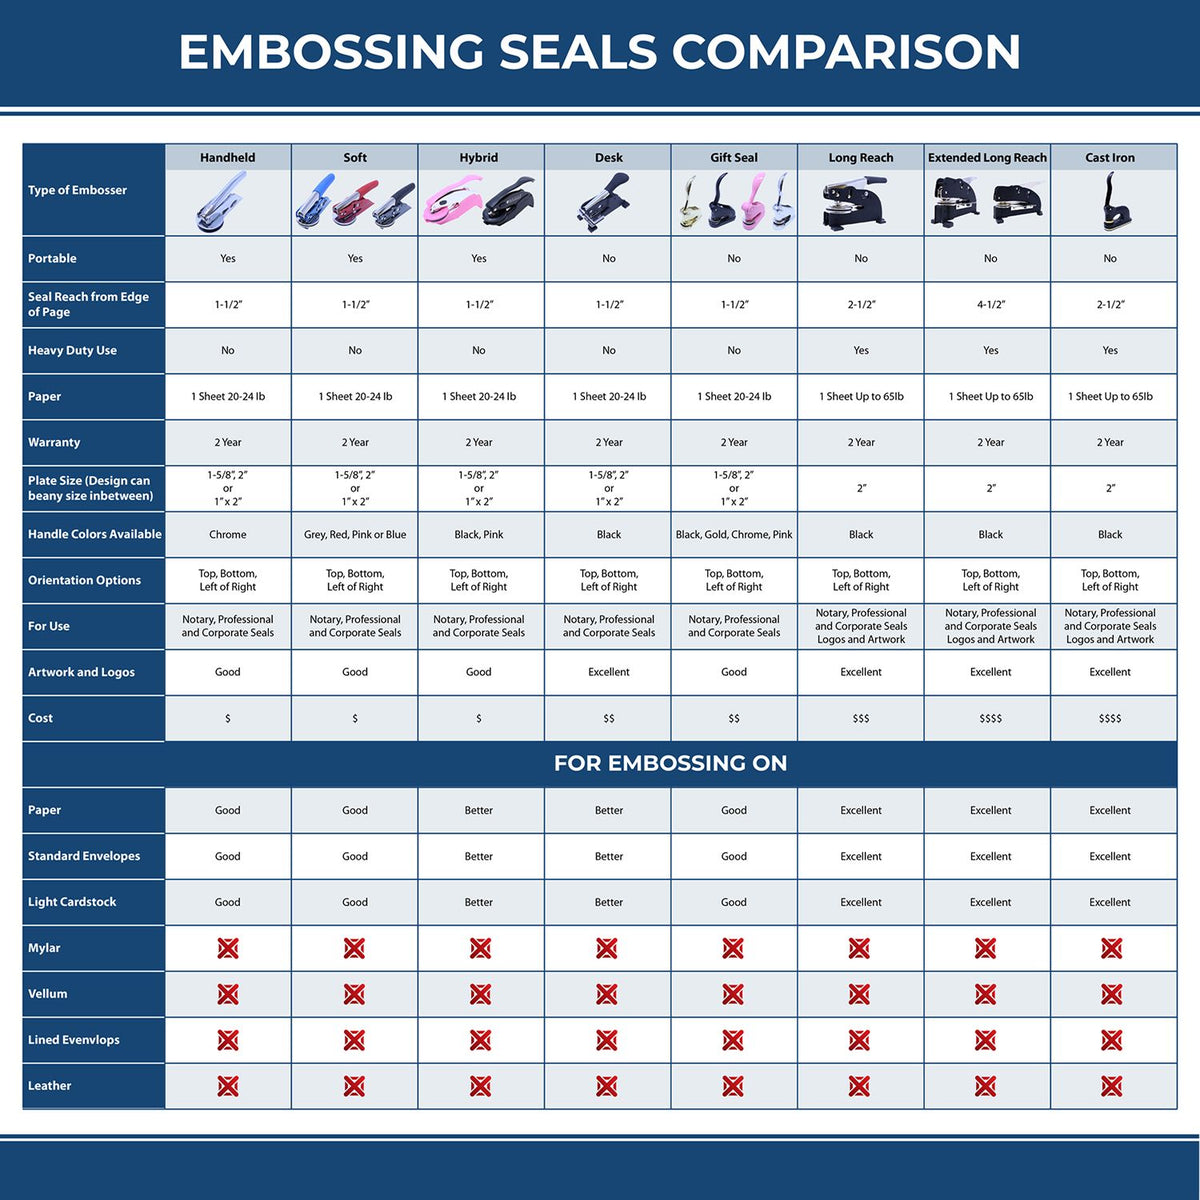 A comparison chart for the different types of mount models available for the Heavy Duty Cast Iron Delaware Architect Embosser.